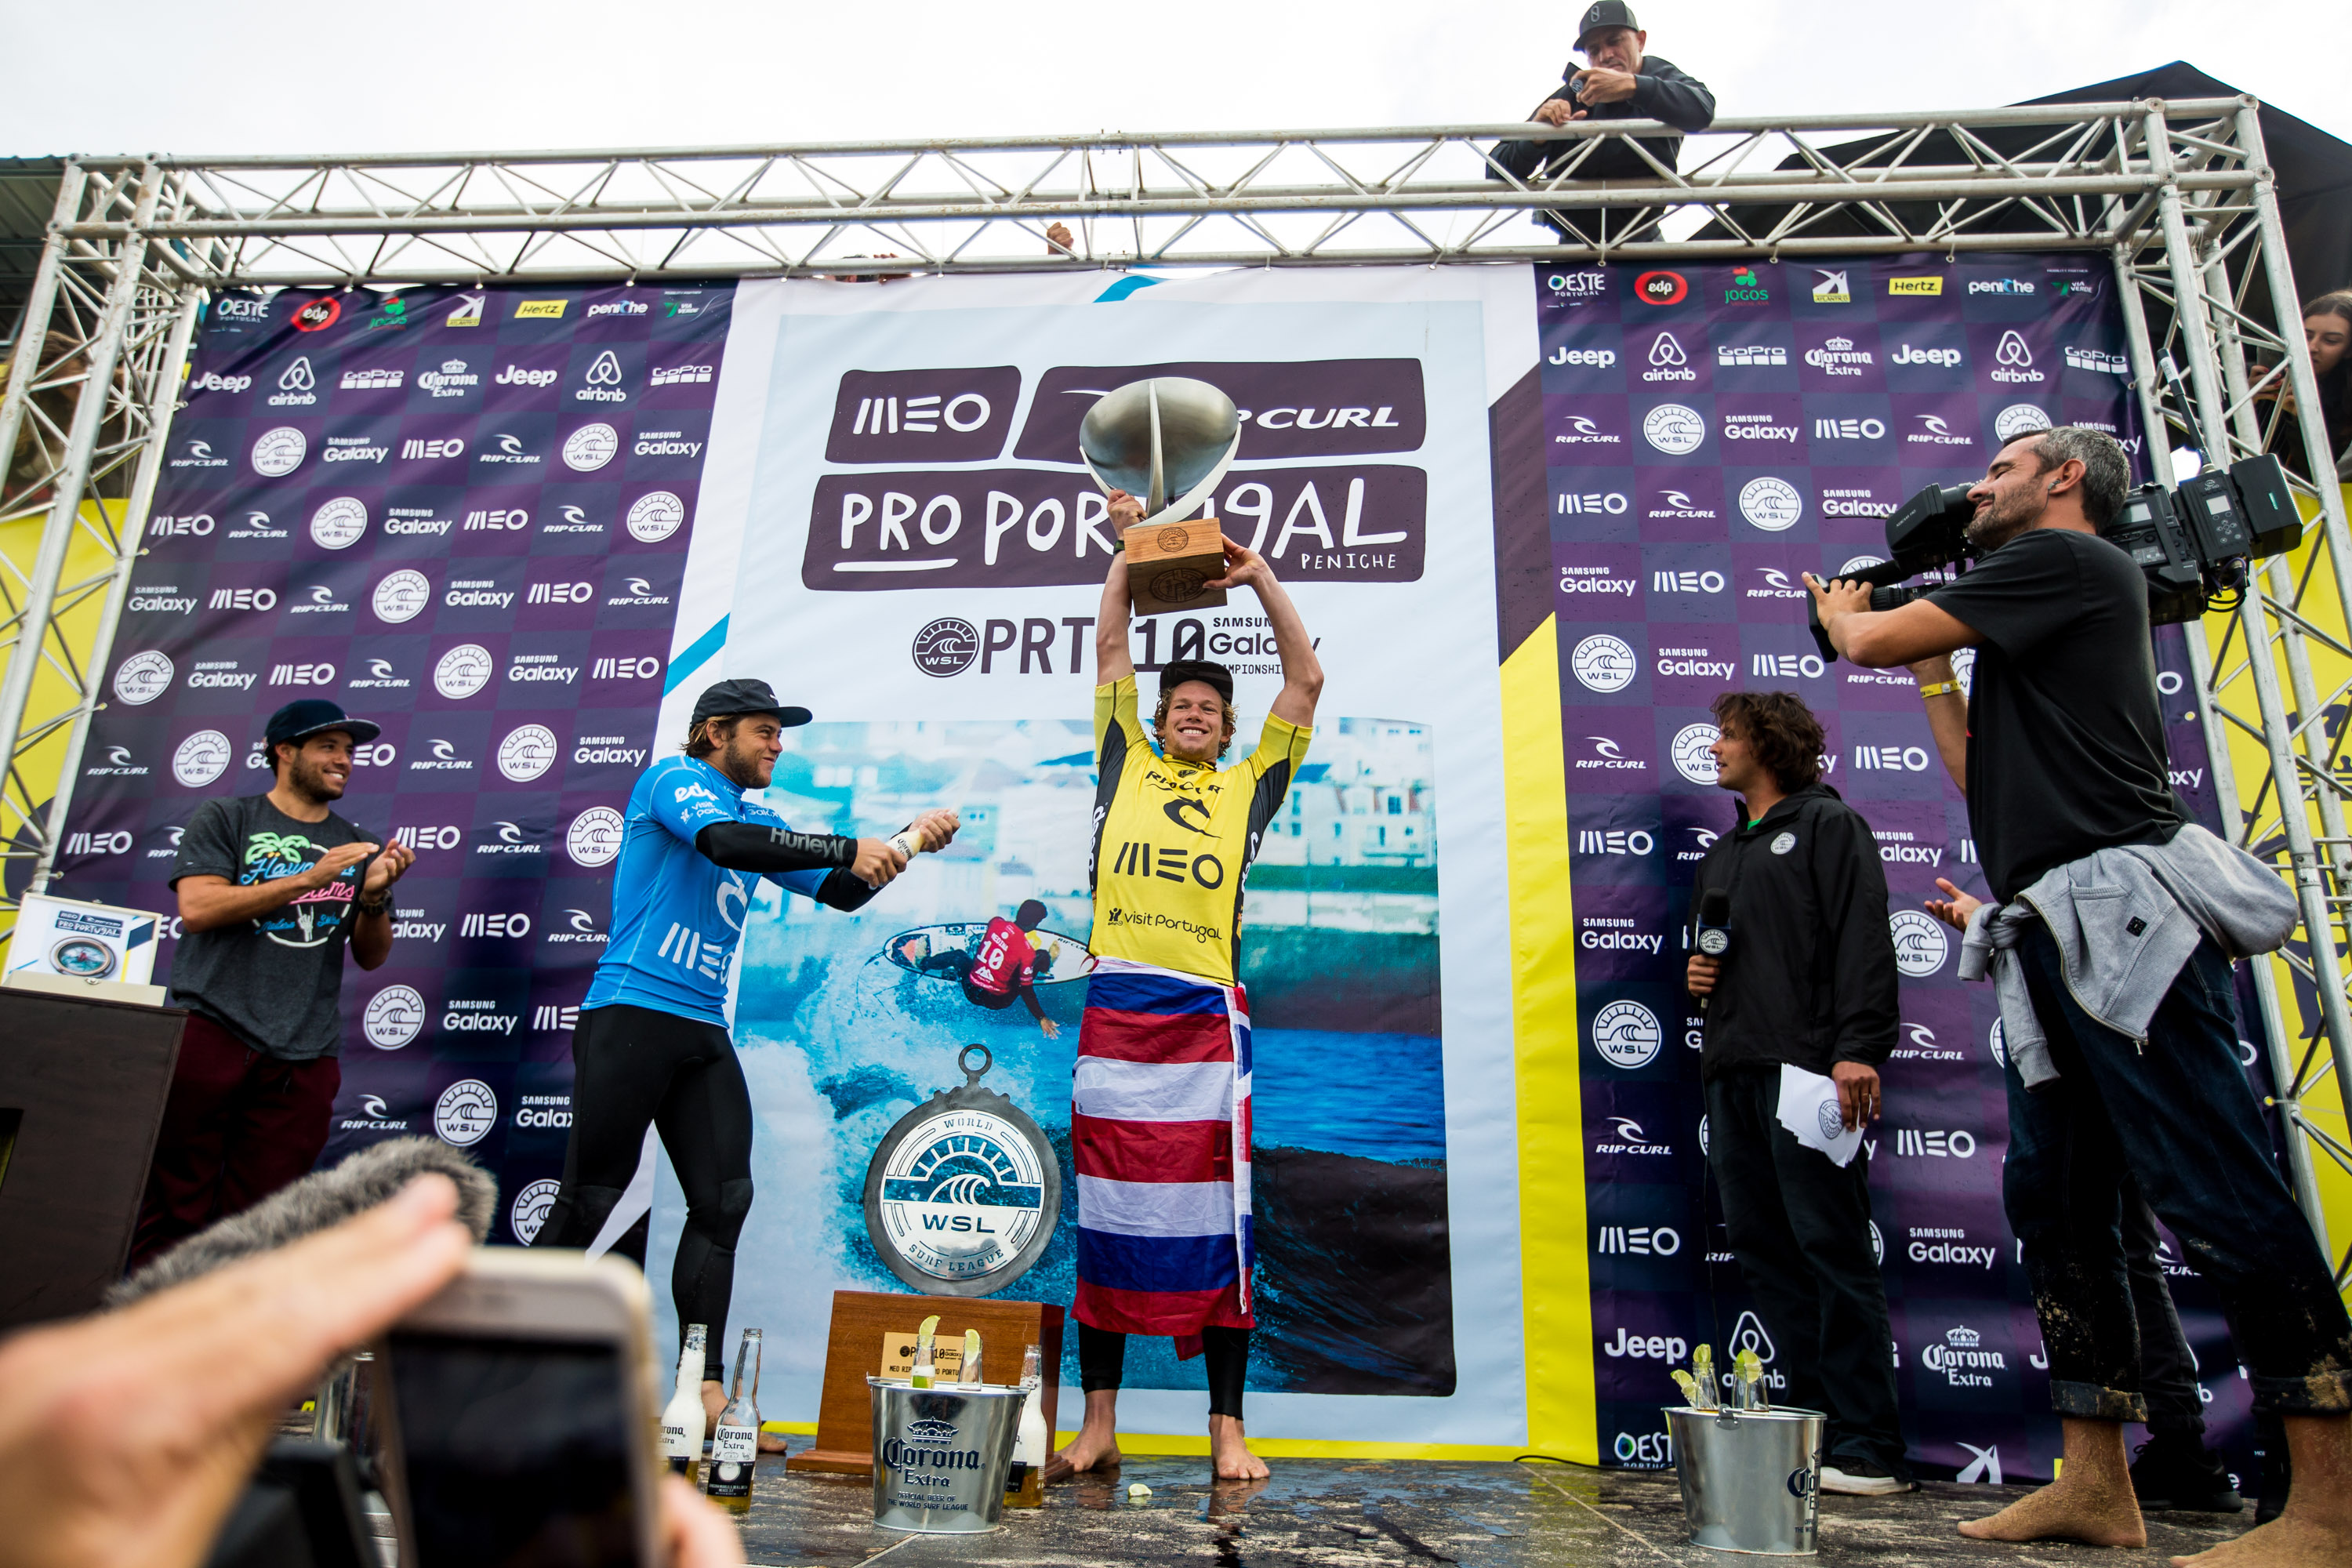 Monster Energy’s John John Florence Wins His First World Surf League World Title  After Winning the Meo Rip Curl Pro in Portugal